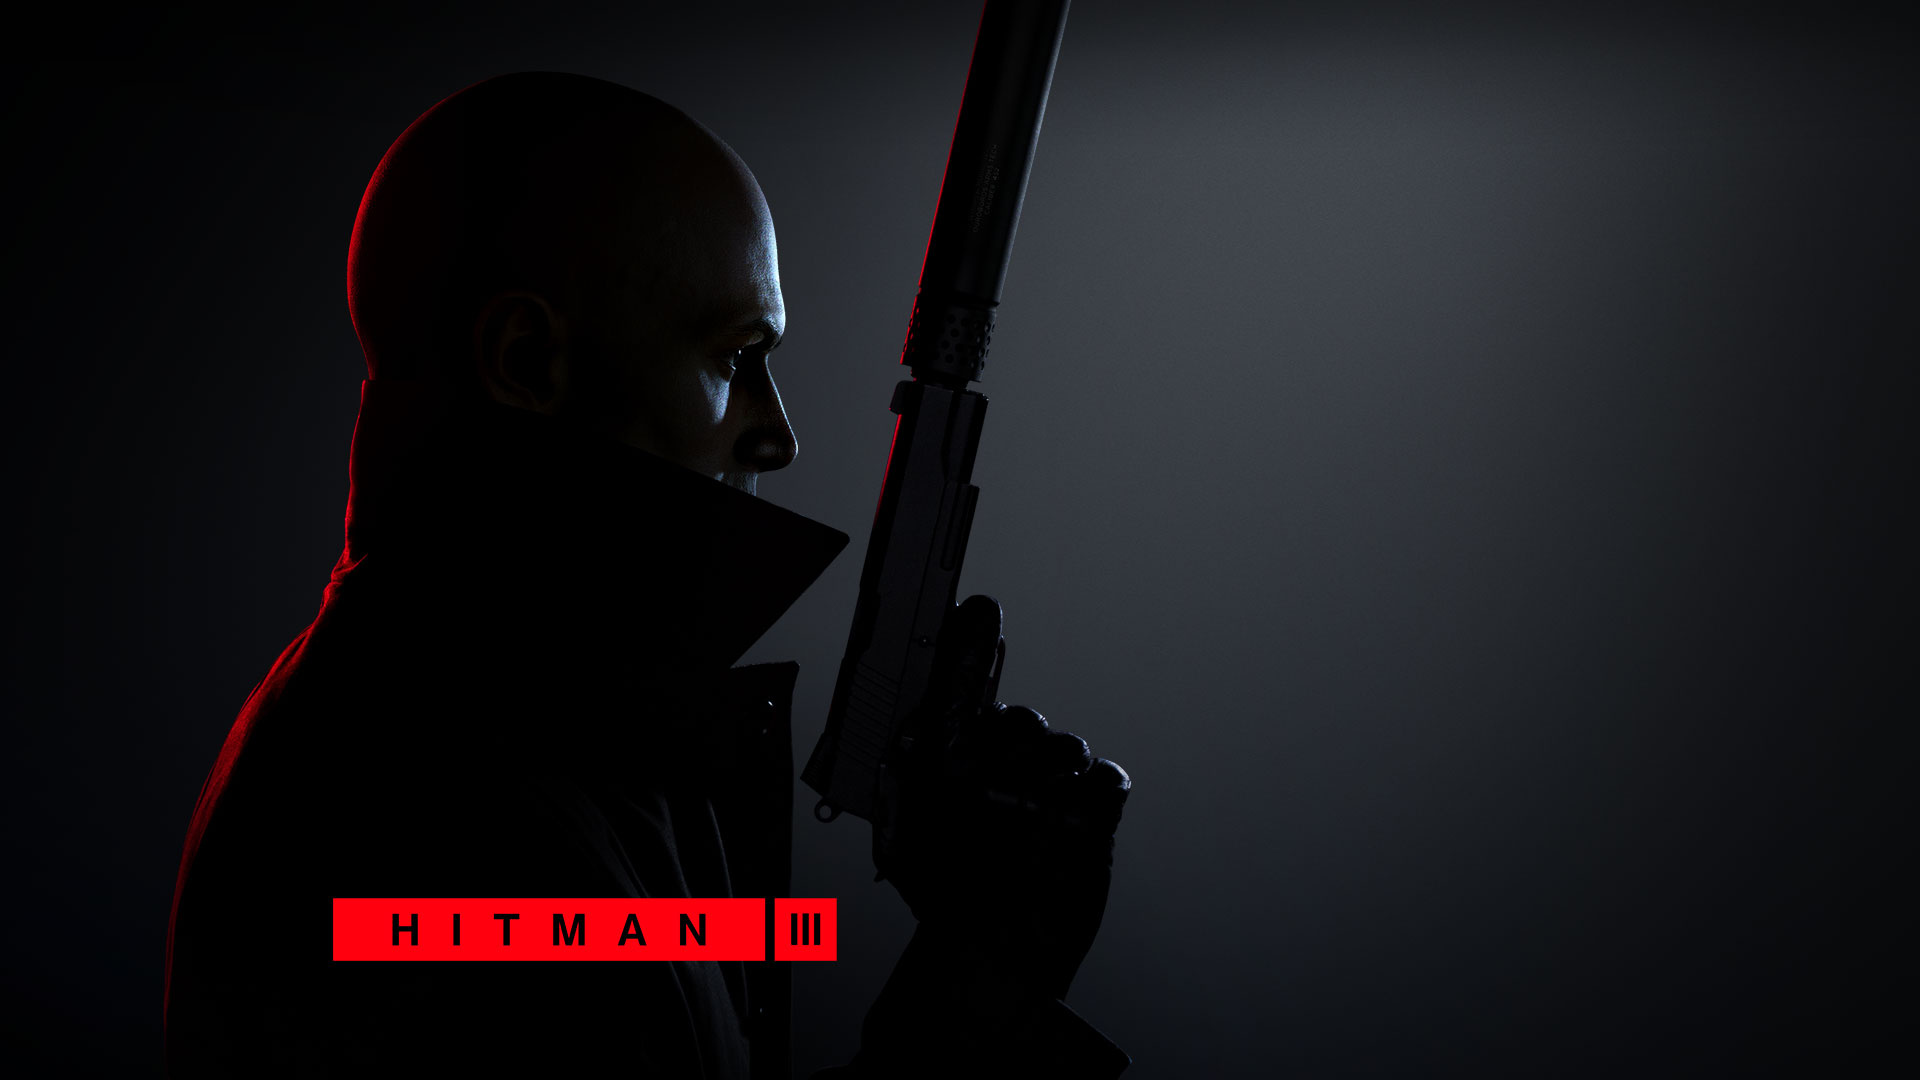 Hitman: Contracts, Dark and suspenseful, Stealth gameplay, Assassination missions, 1920x1080 Full HD Desktop